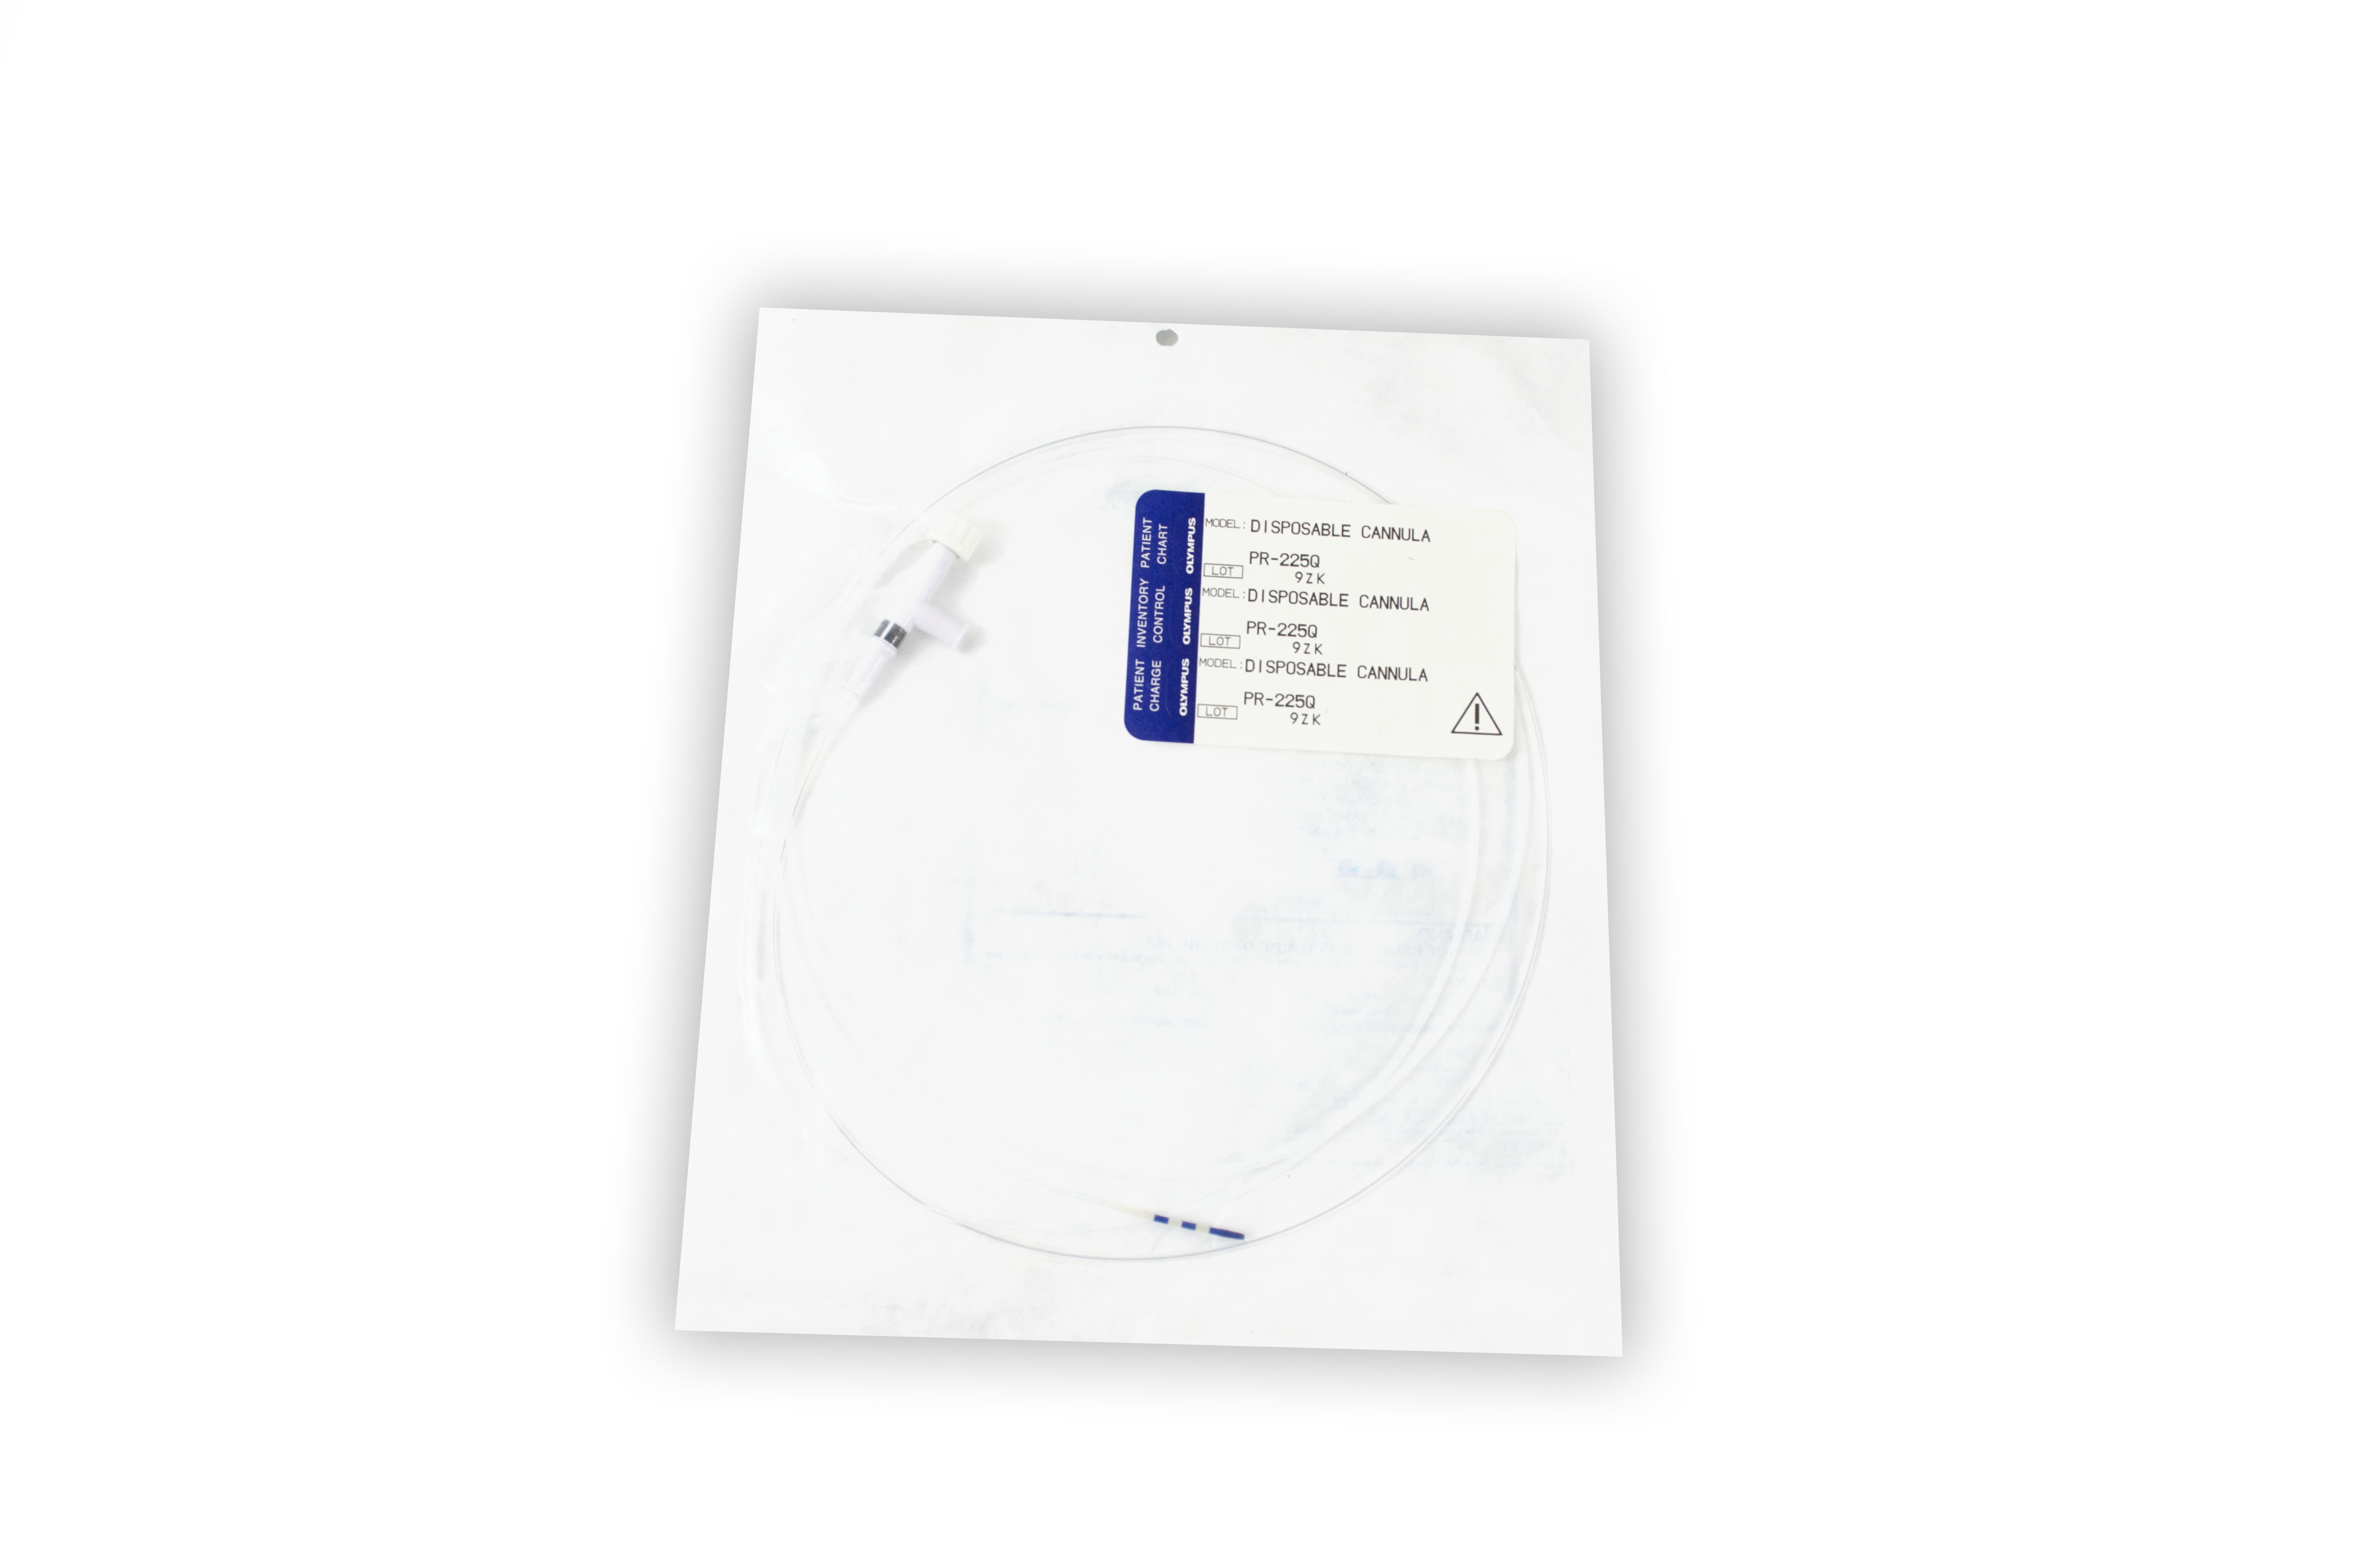 [Out-of-Date] Olympus Disposable Cannula - PR-225Q